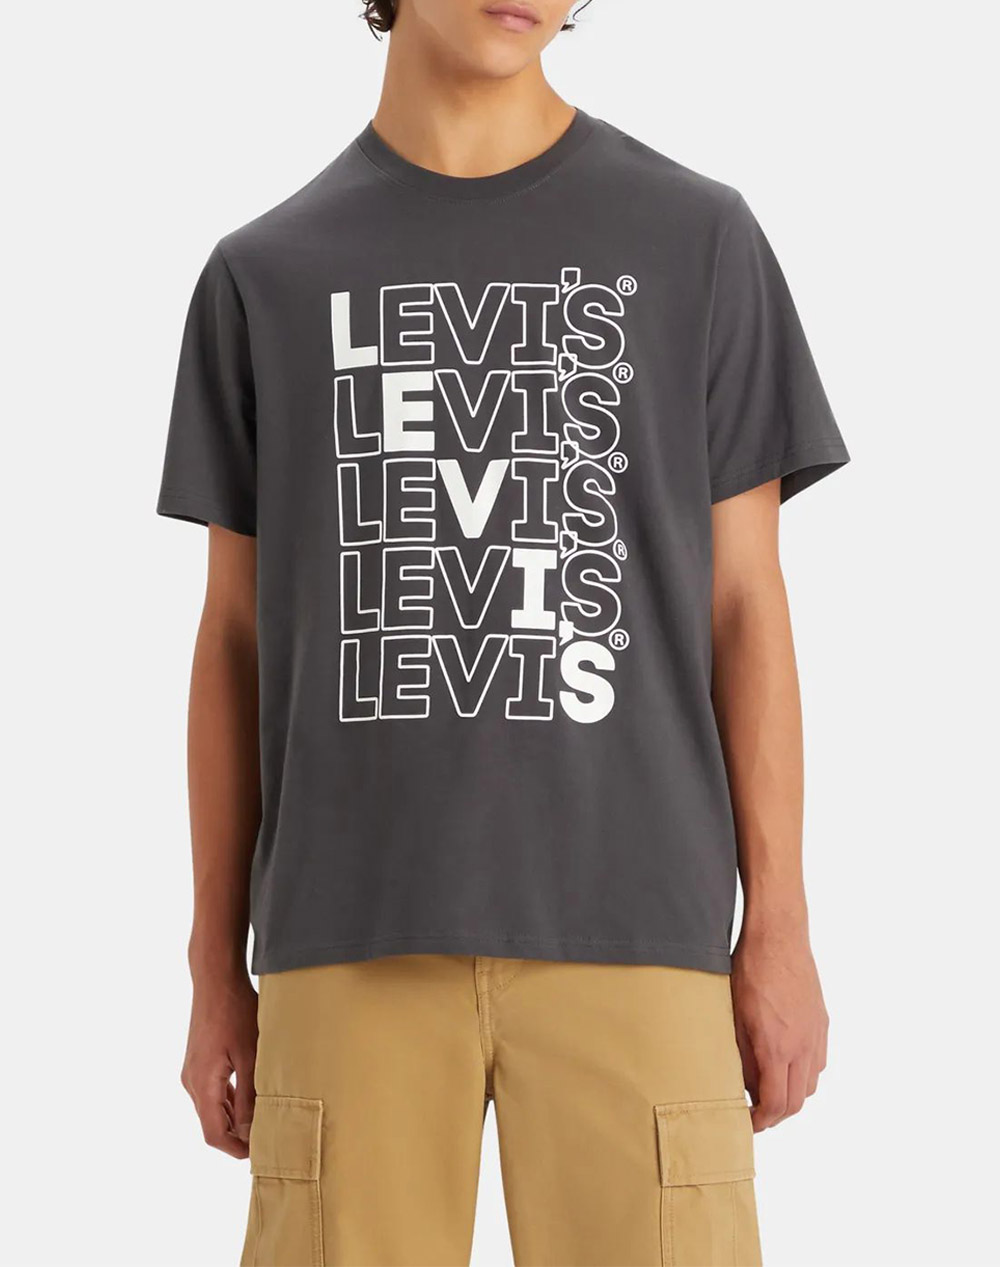 LEVIS RELAXED FIT TEE 16143-1428-1428 DarkGray